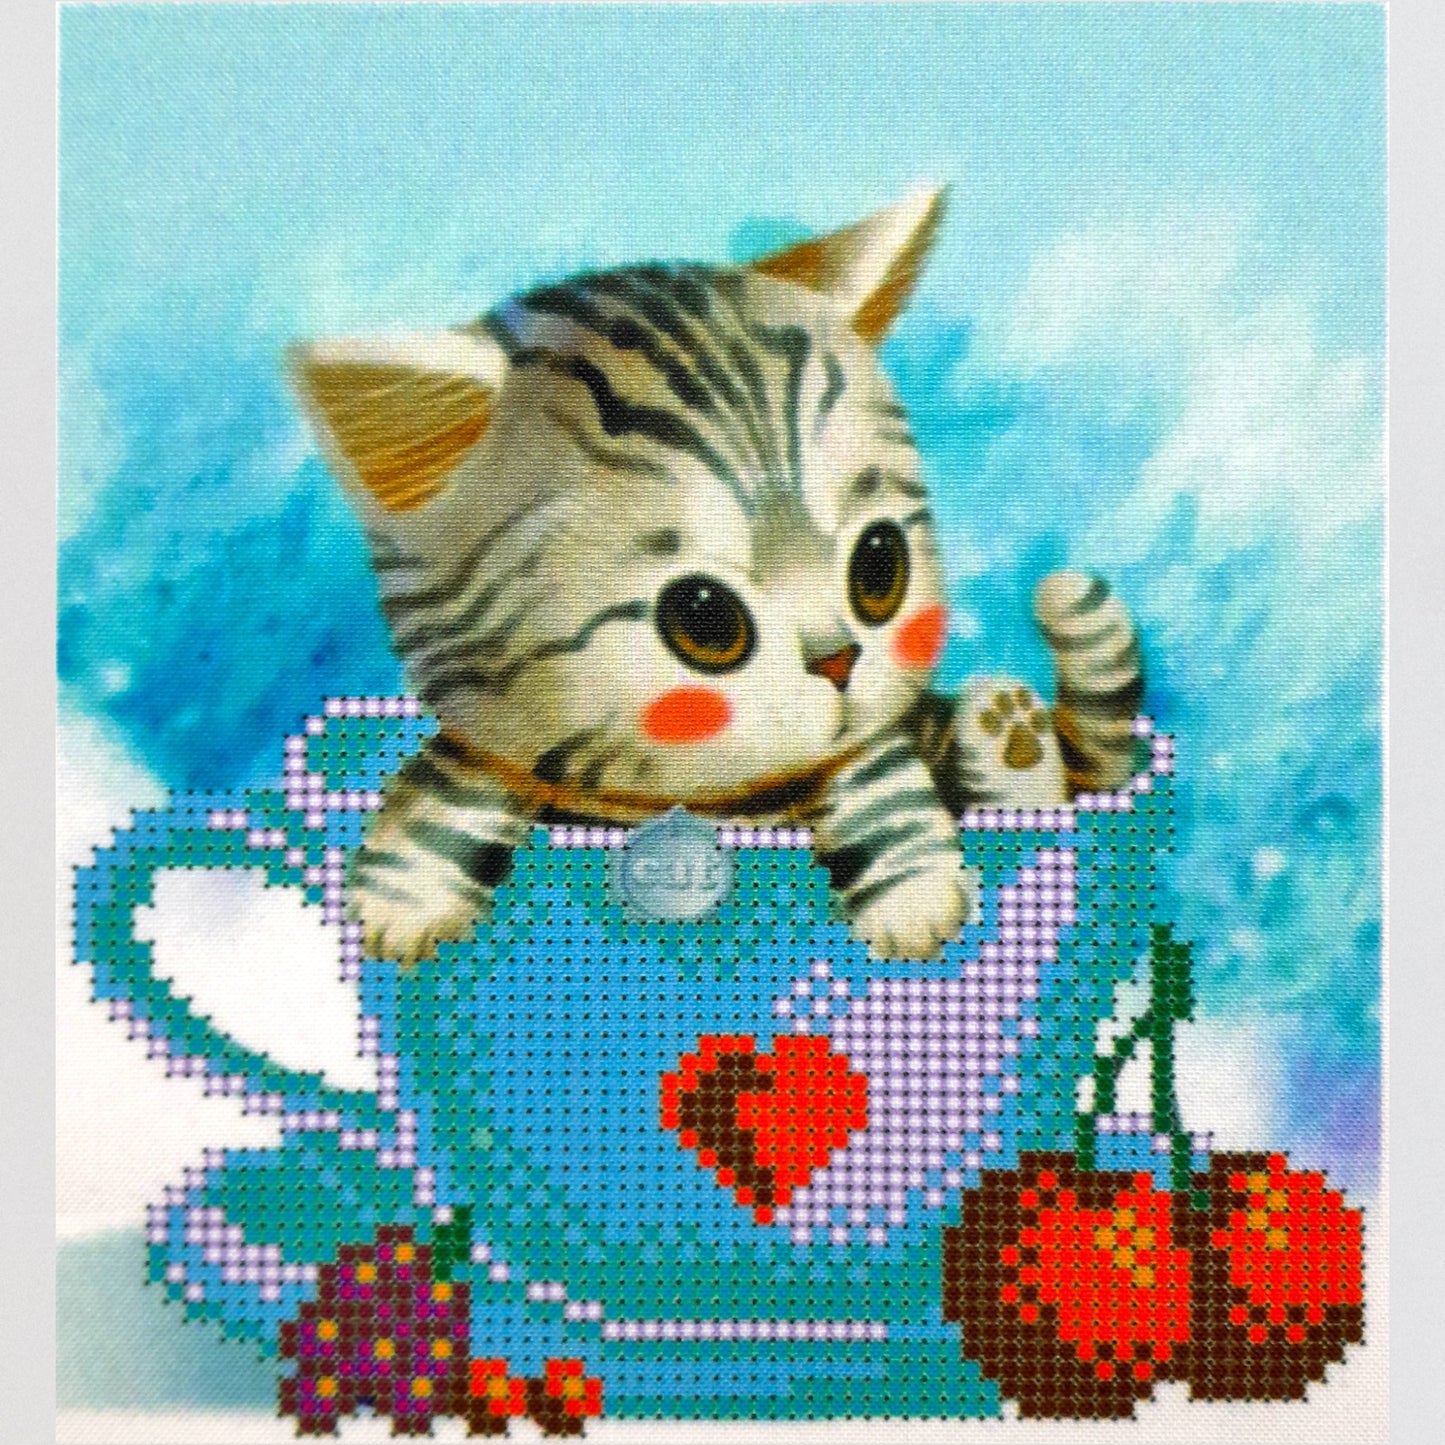 DIY Bead embroidery kit  "Kitten in a cup". Size: 5.9 - 7.5 in (15 - 19cm) - VadymShop